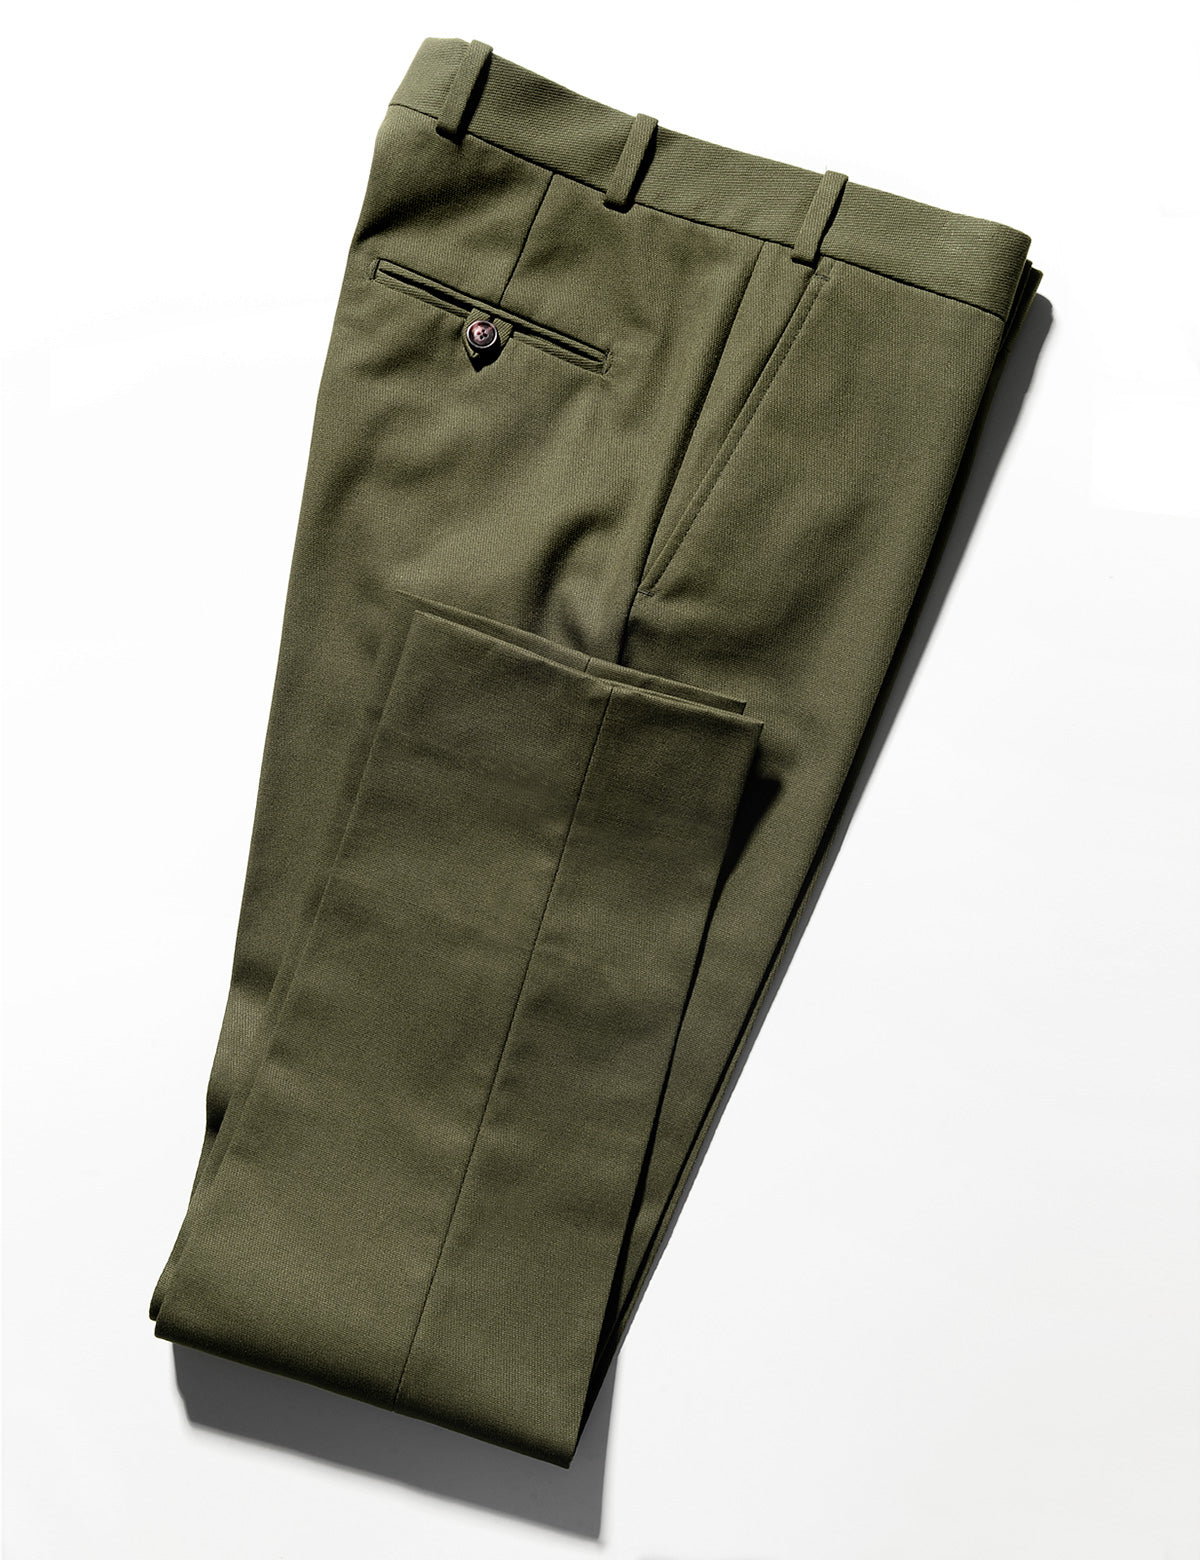 BKT50 Tailored Trousers in Cavalry Twill - Olive